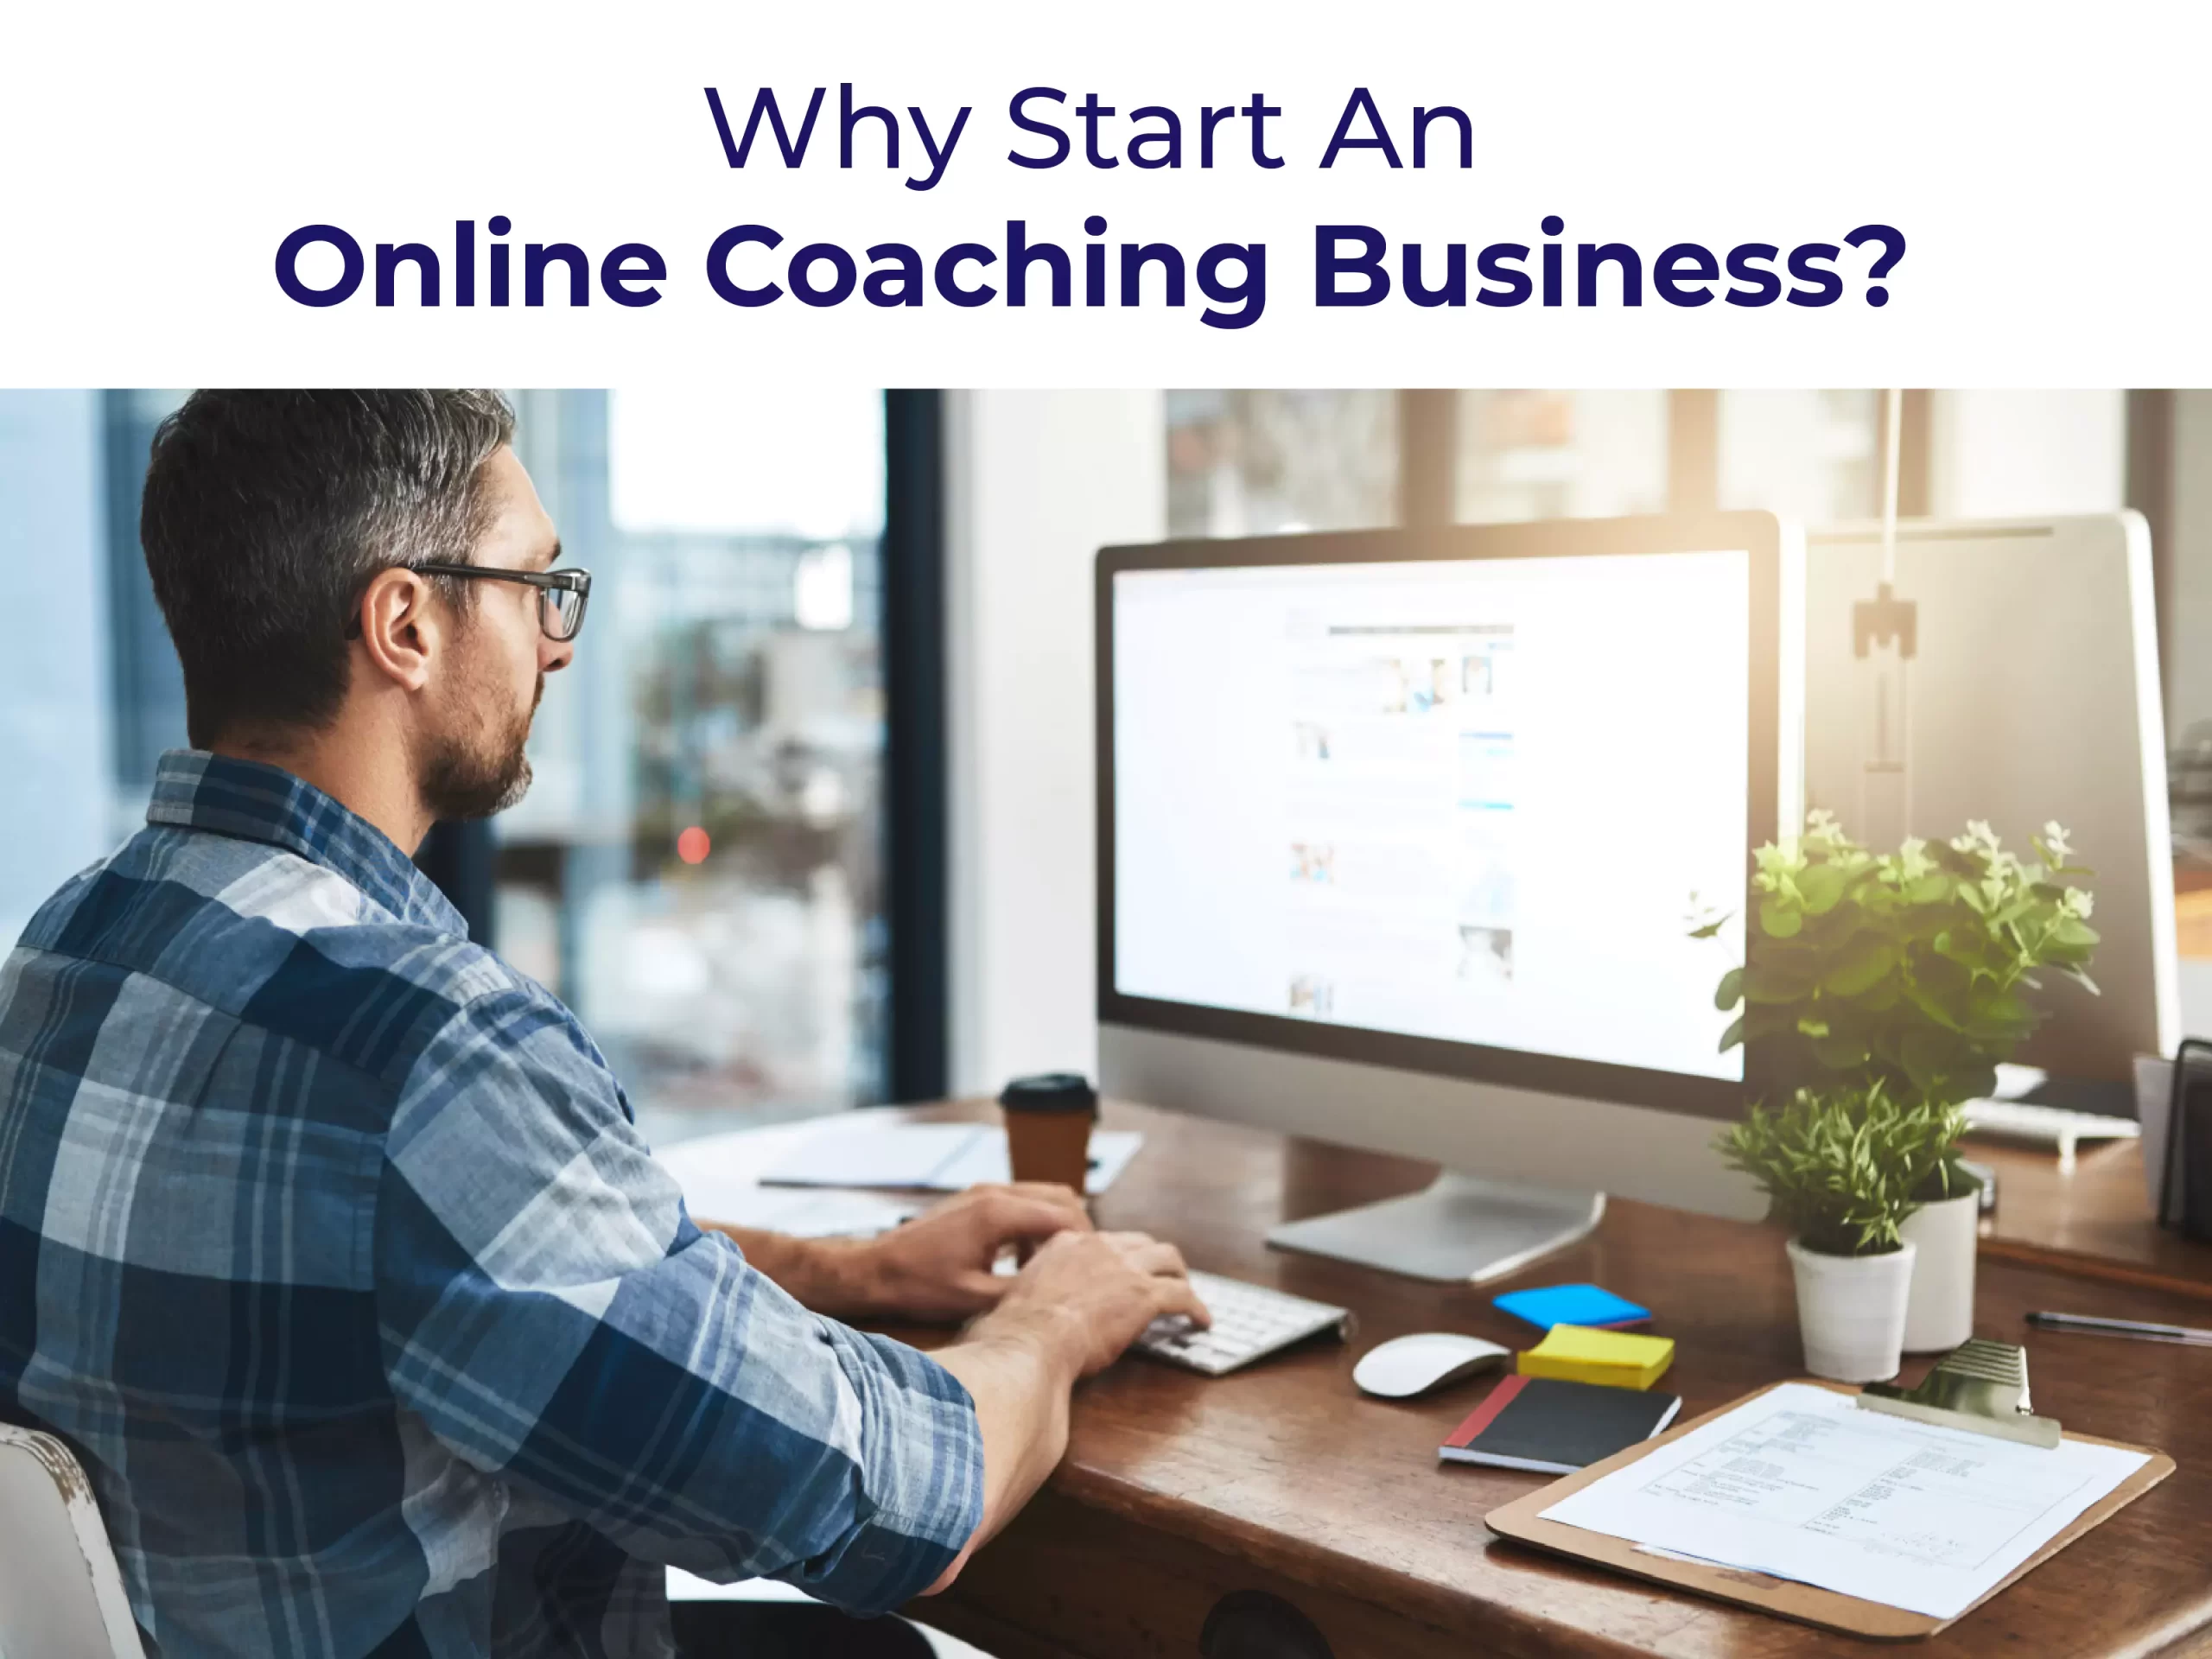 Why start an online coaching business?